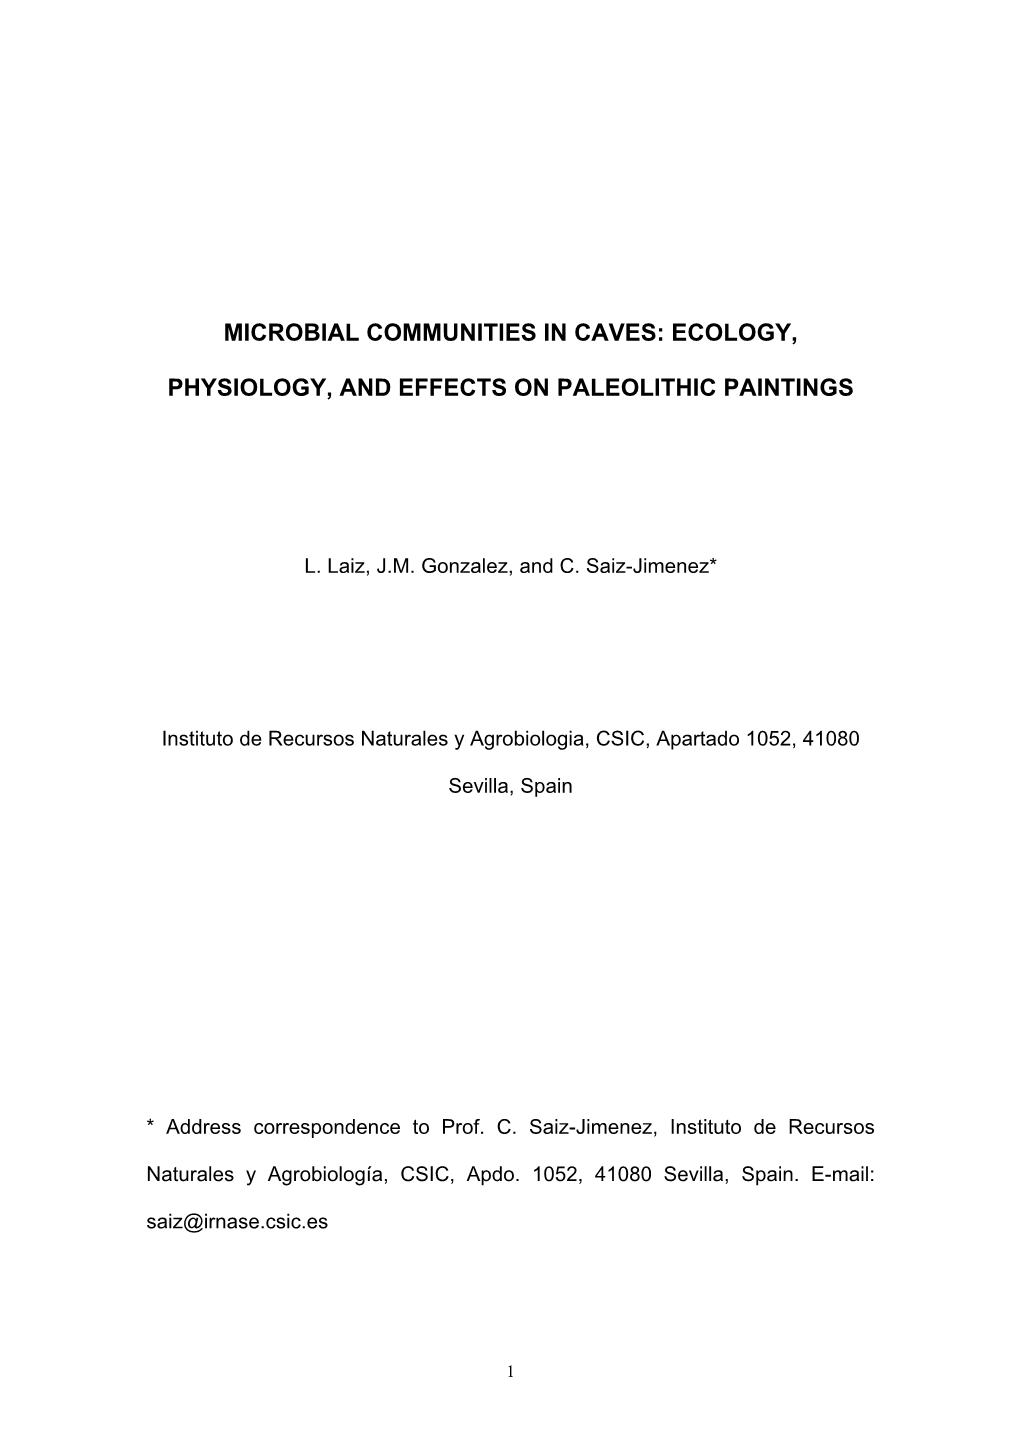 Microbial Communities in Caves: Ecology, Physiology, and Effects On